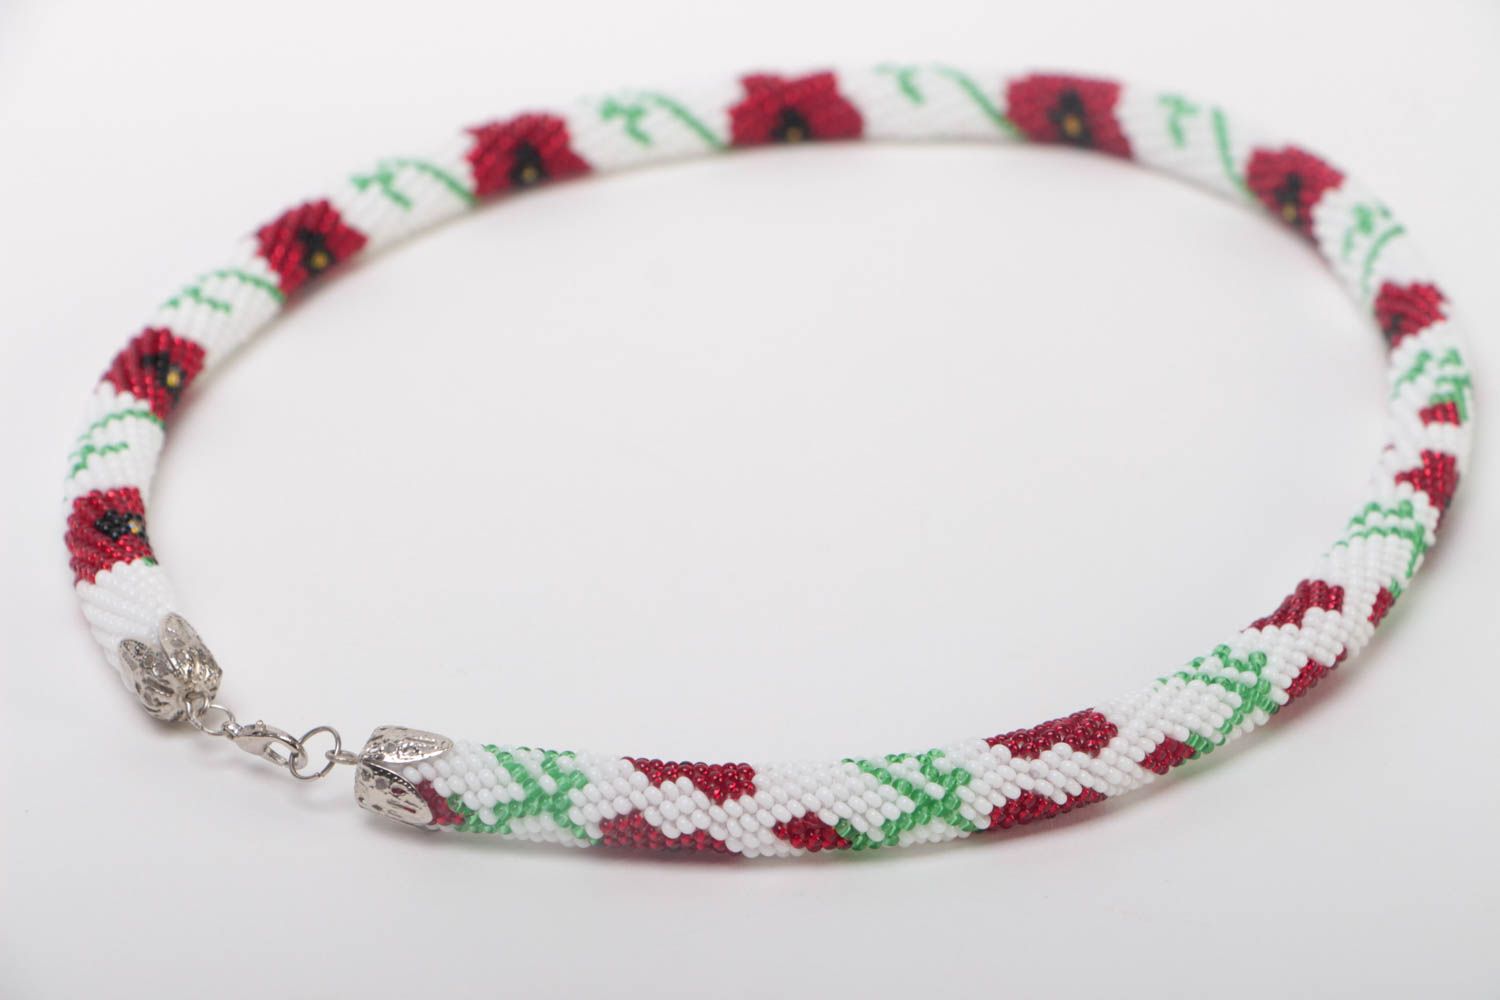 Handmade beaded cord necklace accessories with red flowers white jewelry photo 4